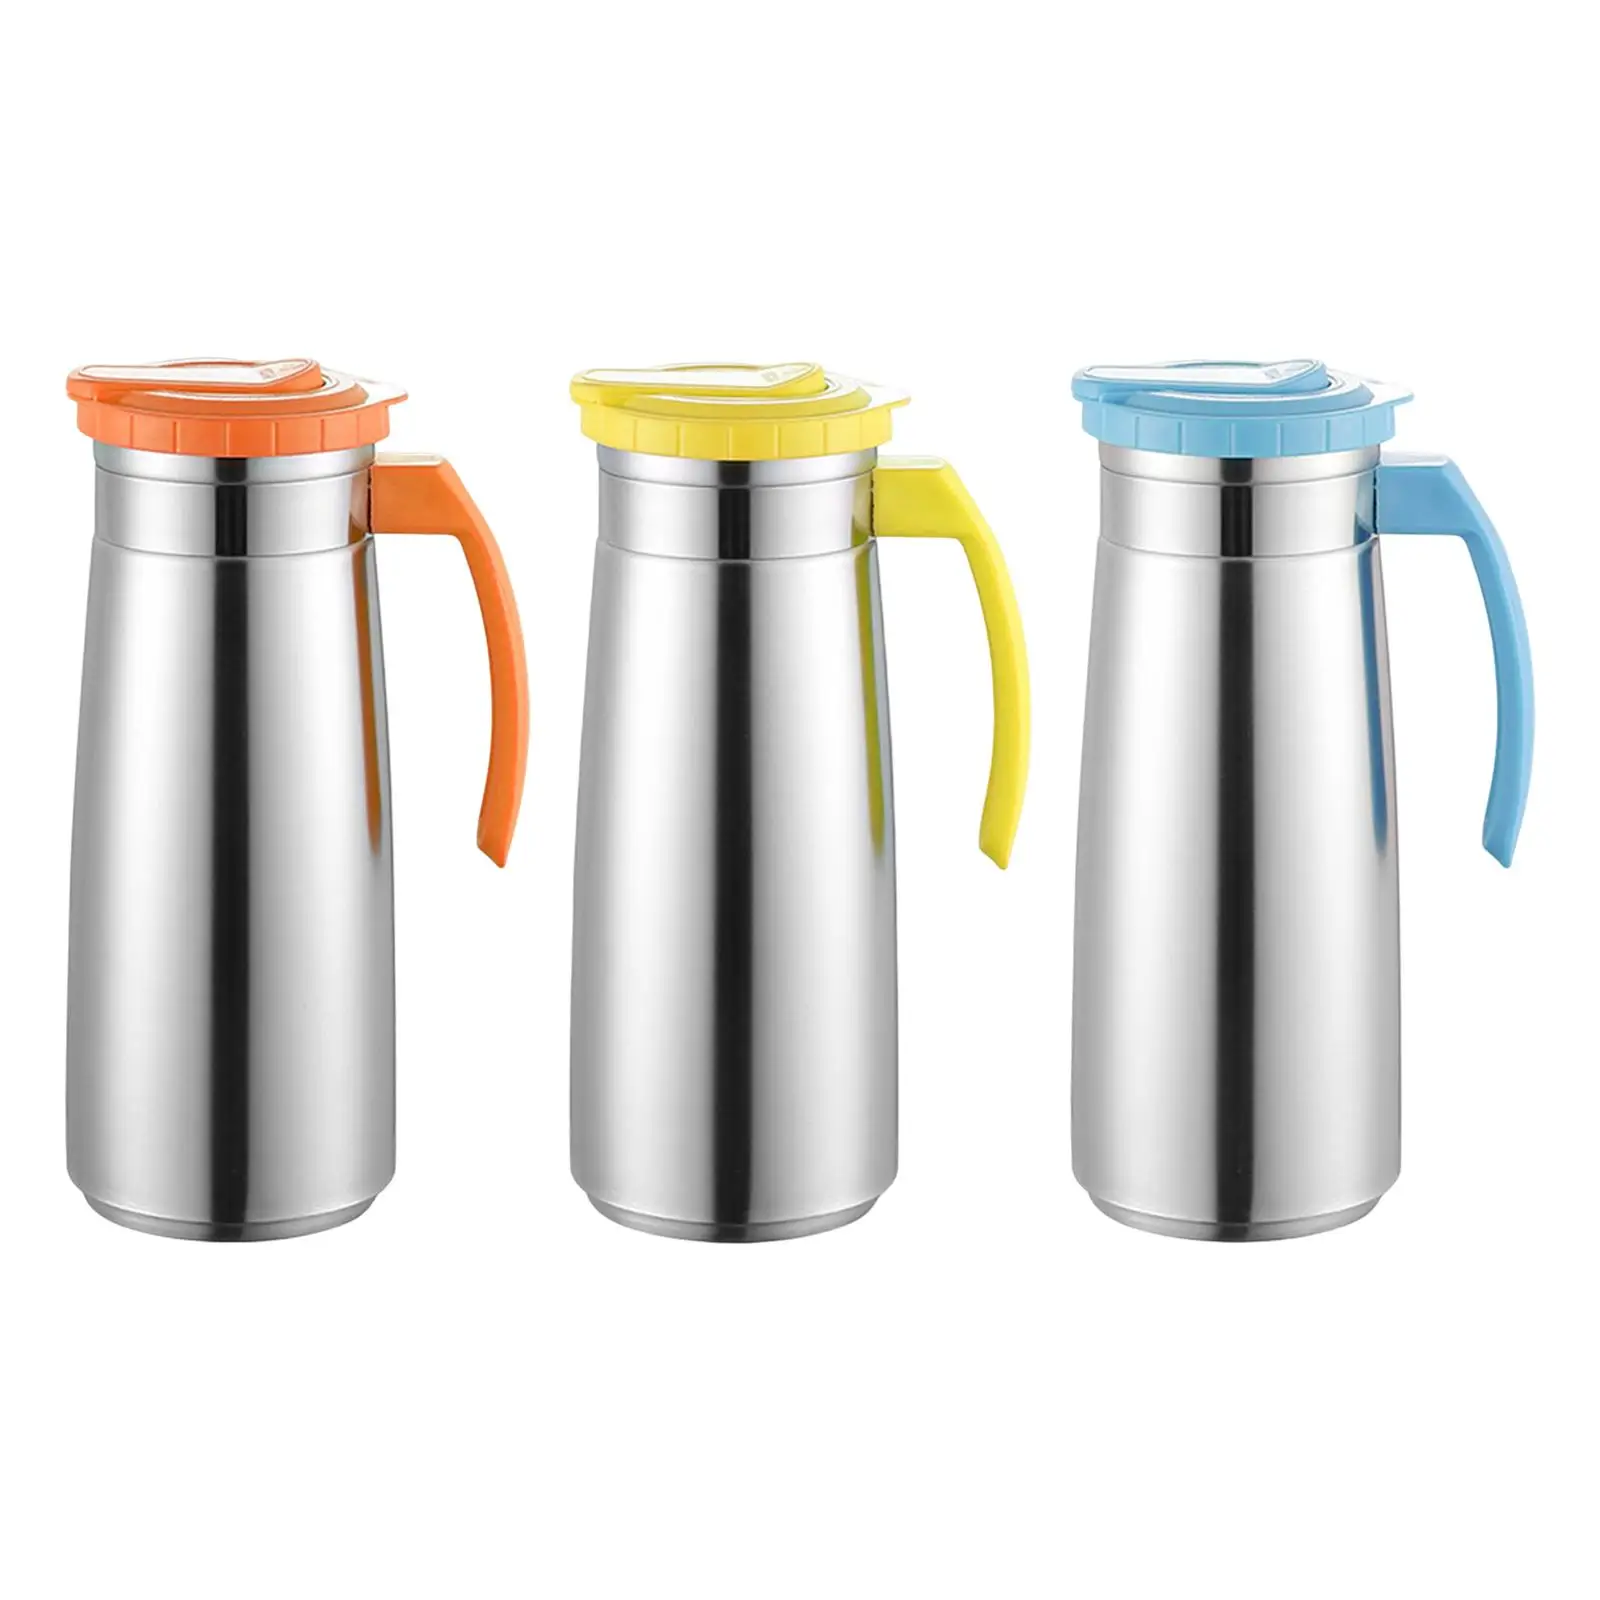 Stainless Steel Jug Water Bottle Leakproof Drinks Water Jug Carafes 1.3L Water Pitcher for Party Fridge Barbecue